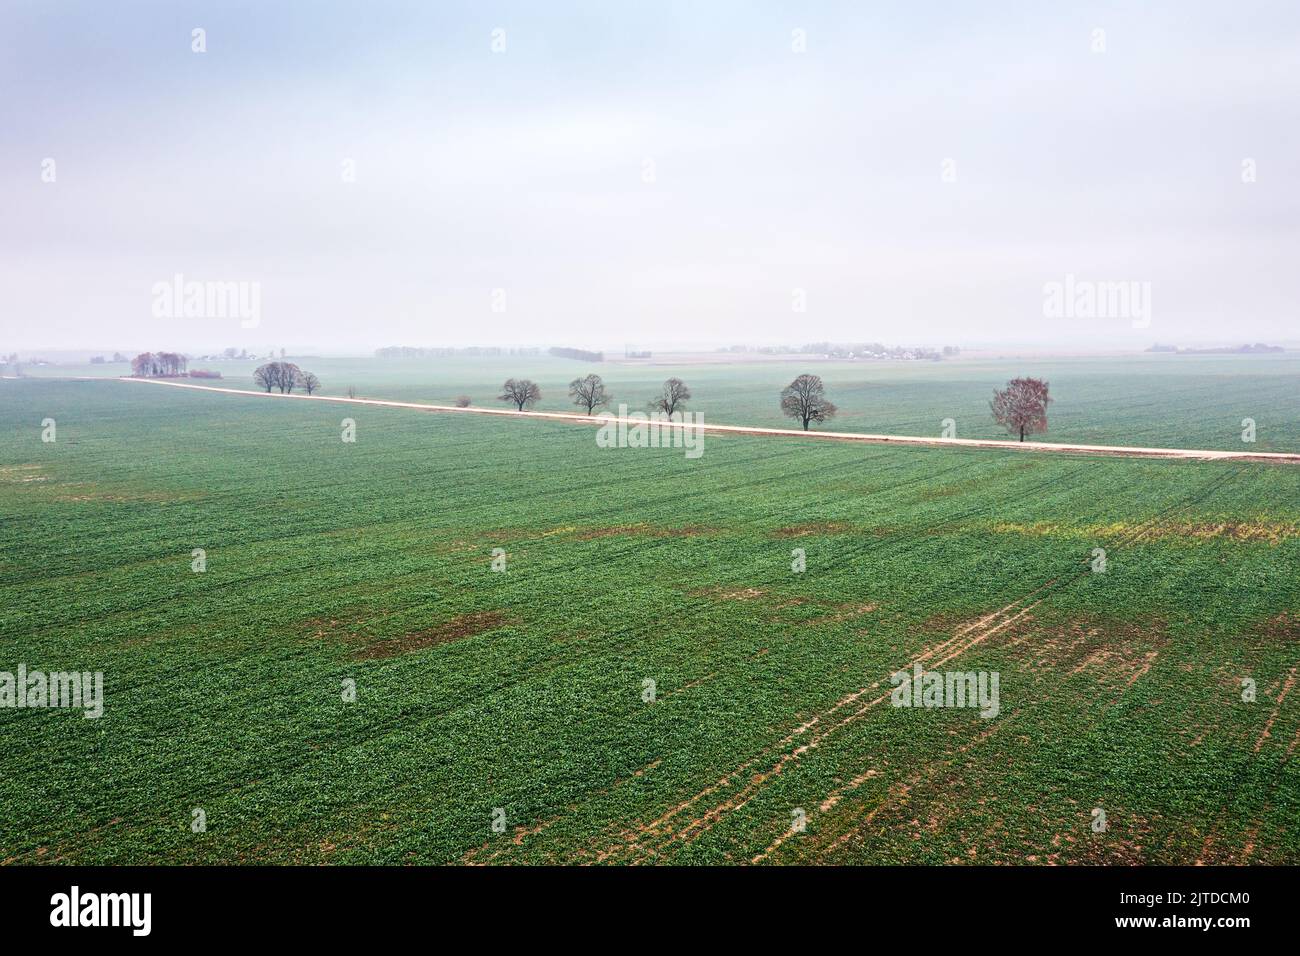 countryside landscape. straight dirt road pass through cultivated green fields. aerial view in foggy autumn day. Stock Photo